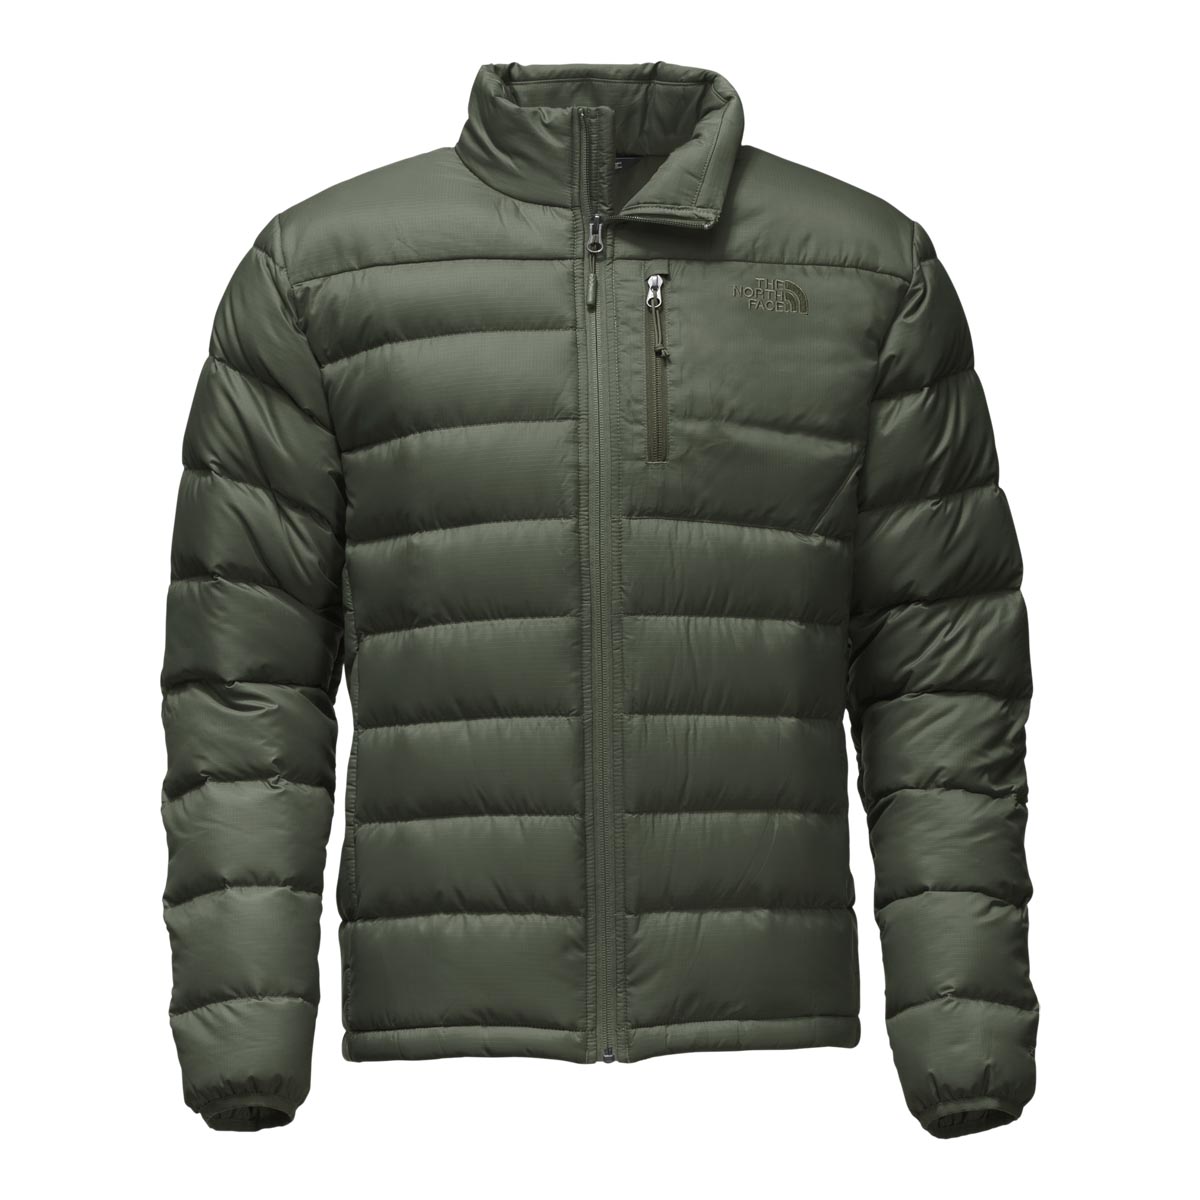 The North Face Men's Aconcagua Jacket Discontinued Pricing